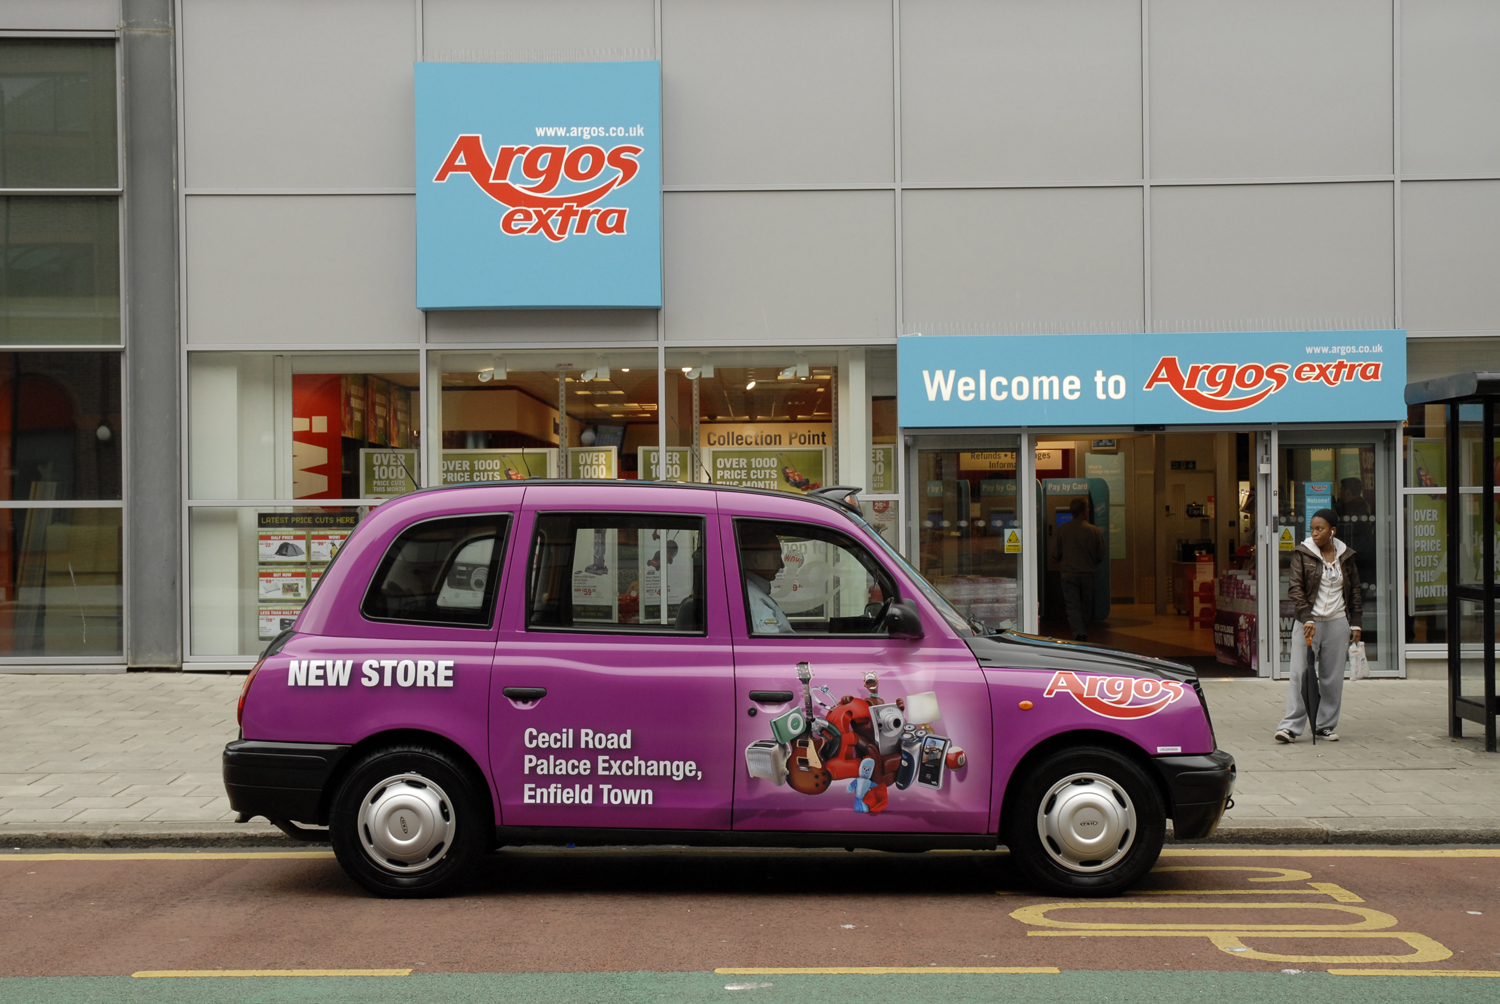 2008 Ubiquitous taxi advertising campaign for Argos - Store Openings